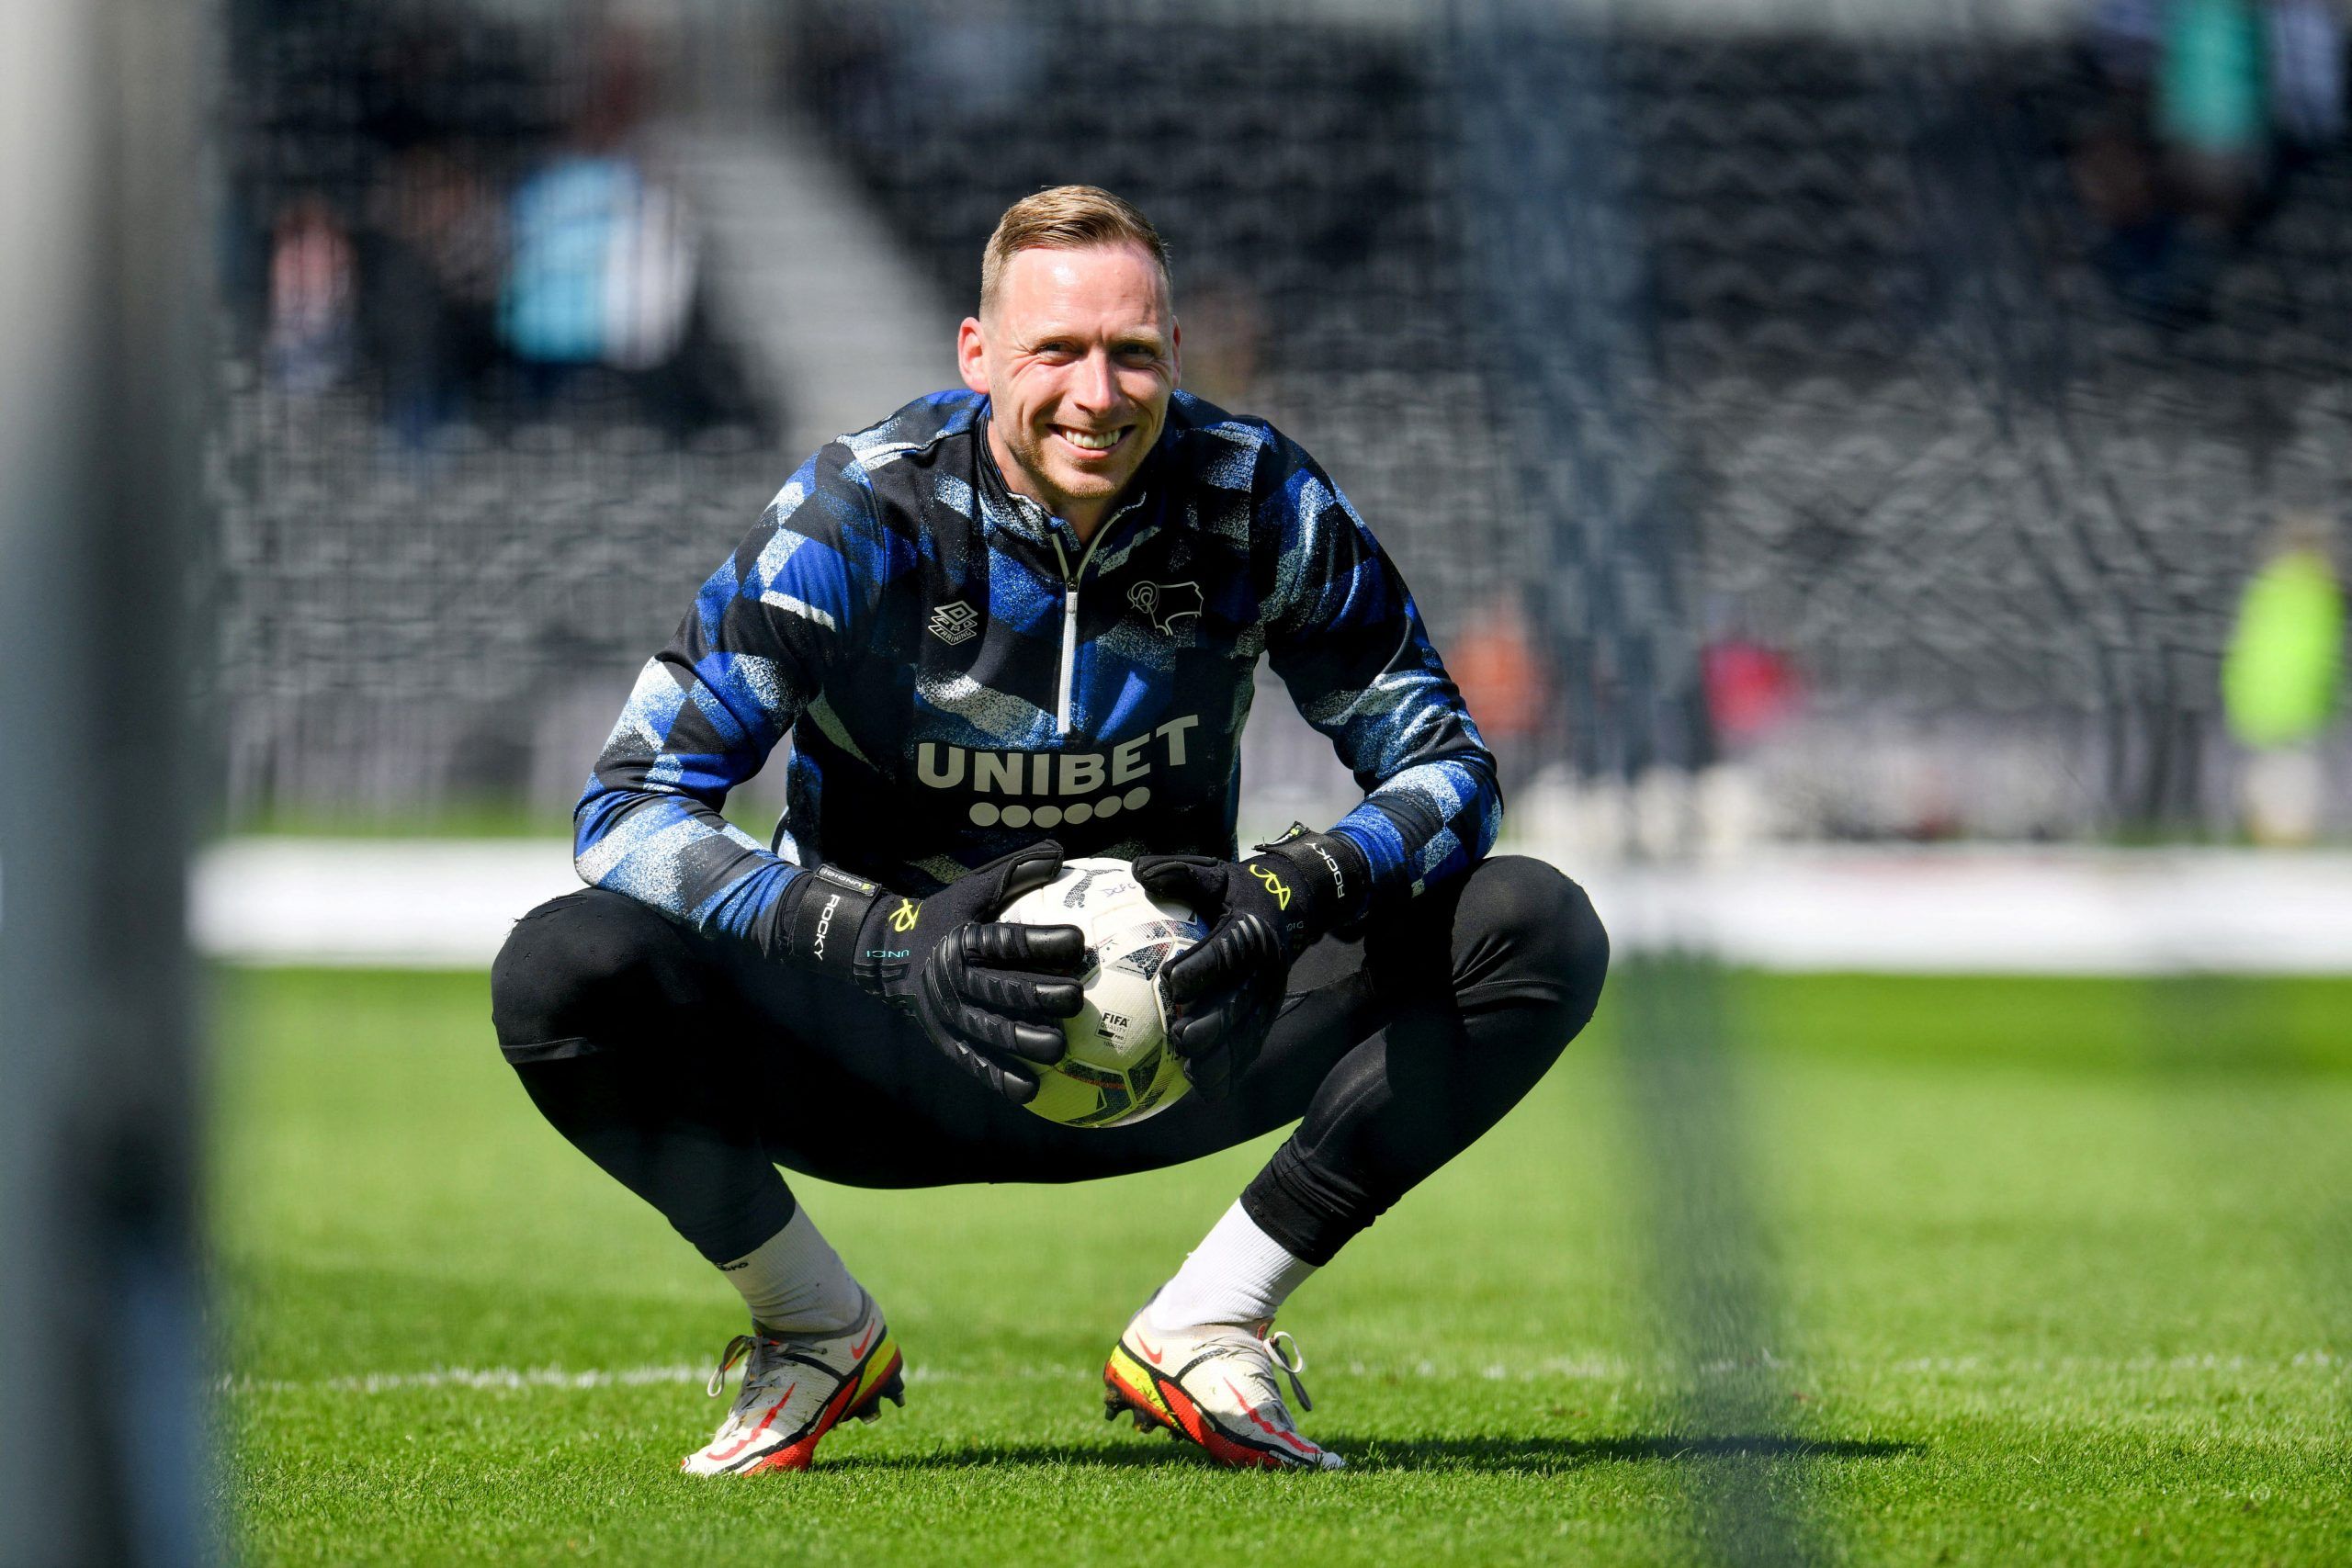 Soccer Football - Championship - Derby County v Bristol City - Pride Park, Derby, Britain - April 23, 2022 Derby County's Ryan Allsop during the warm up before the match   Action Images/Paul Burrows  EDITORIAL USE ONLY. No use with unauthorized audio, video, data, fixture lists, club/league logos or 